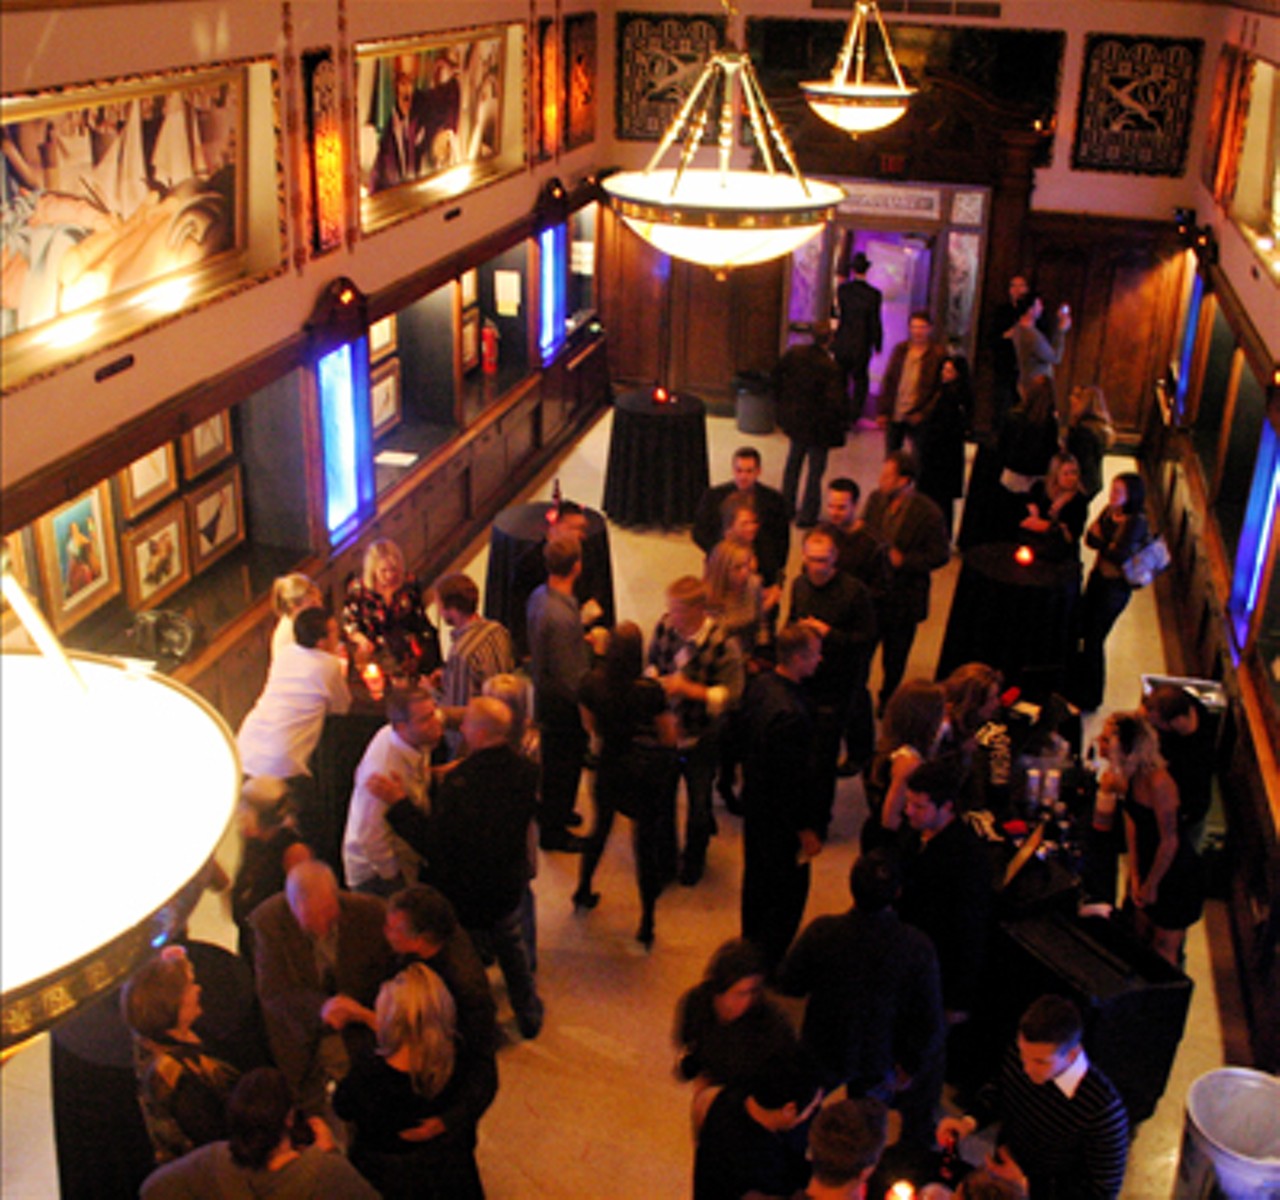 The main floor/entrance to the 3-level bar.